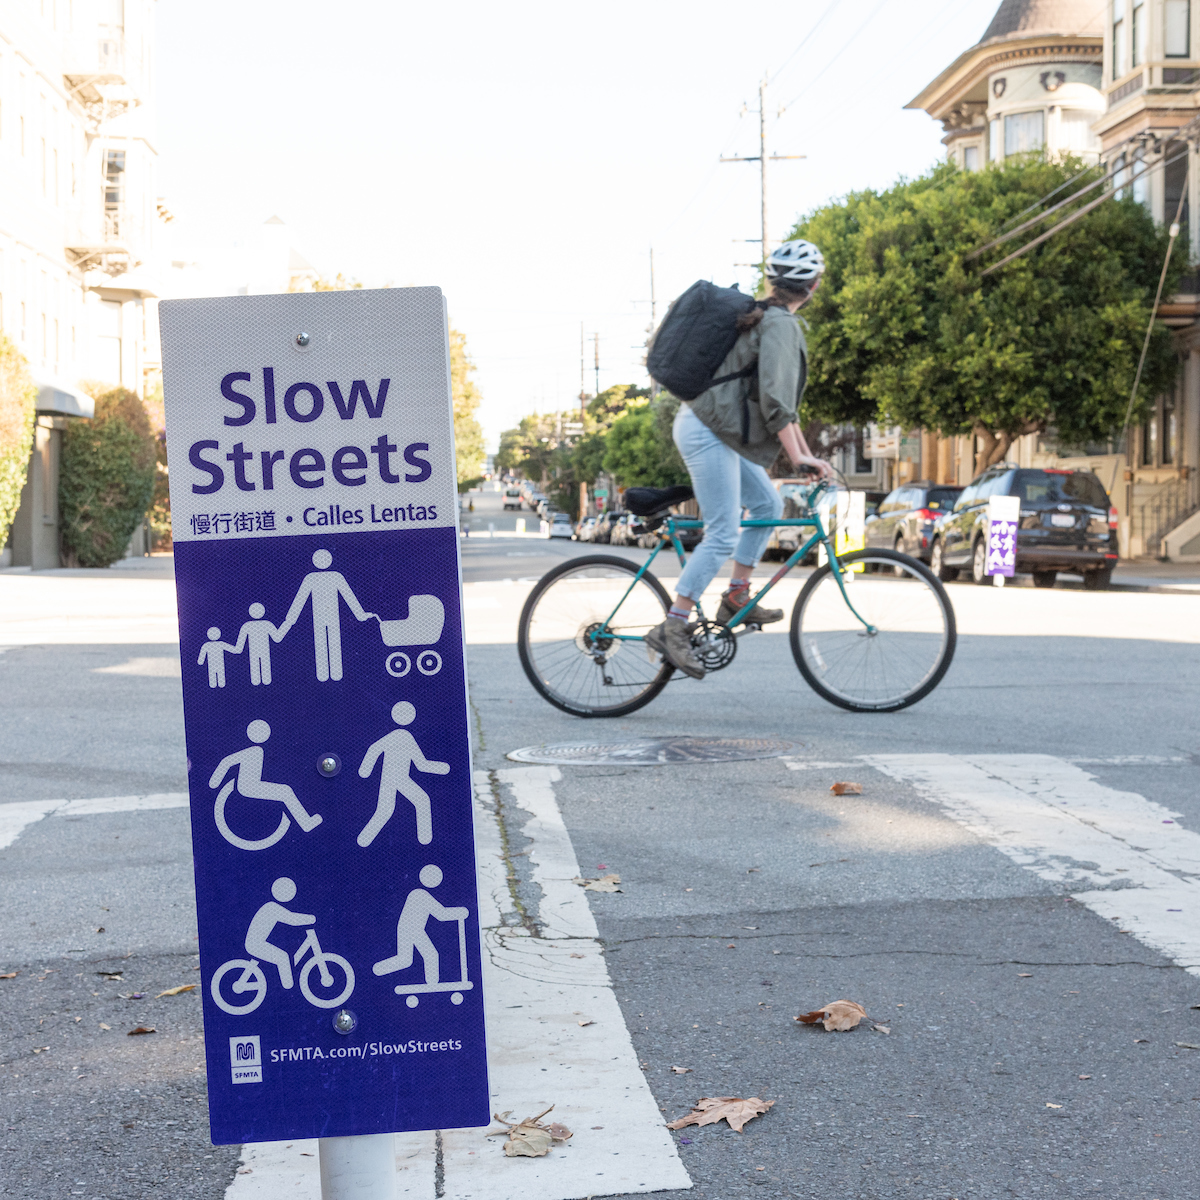 Close up image of a street sign with the words "Slow Streets." Under white figurine wheel users and pedestrians are seen. There is a bicyclist in the background 